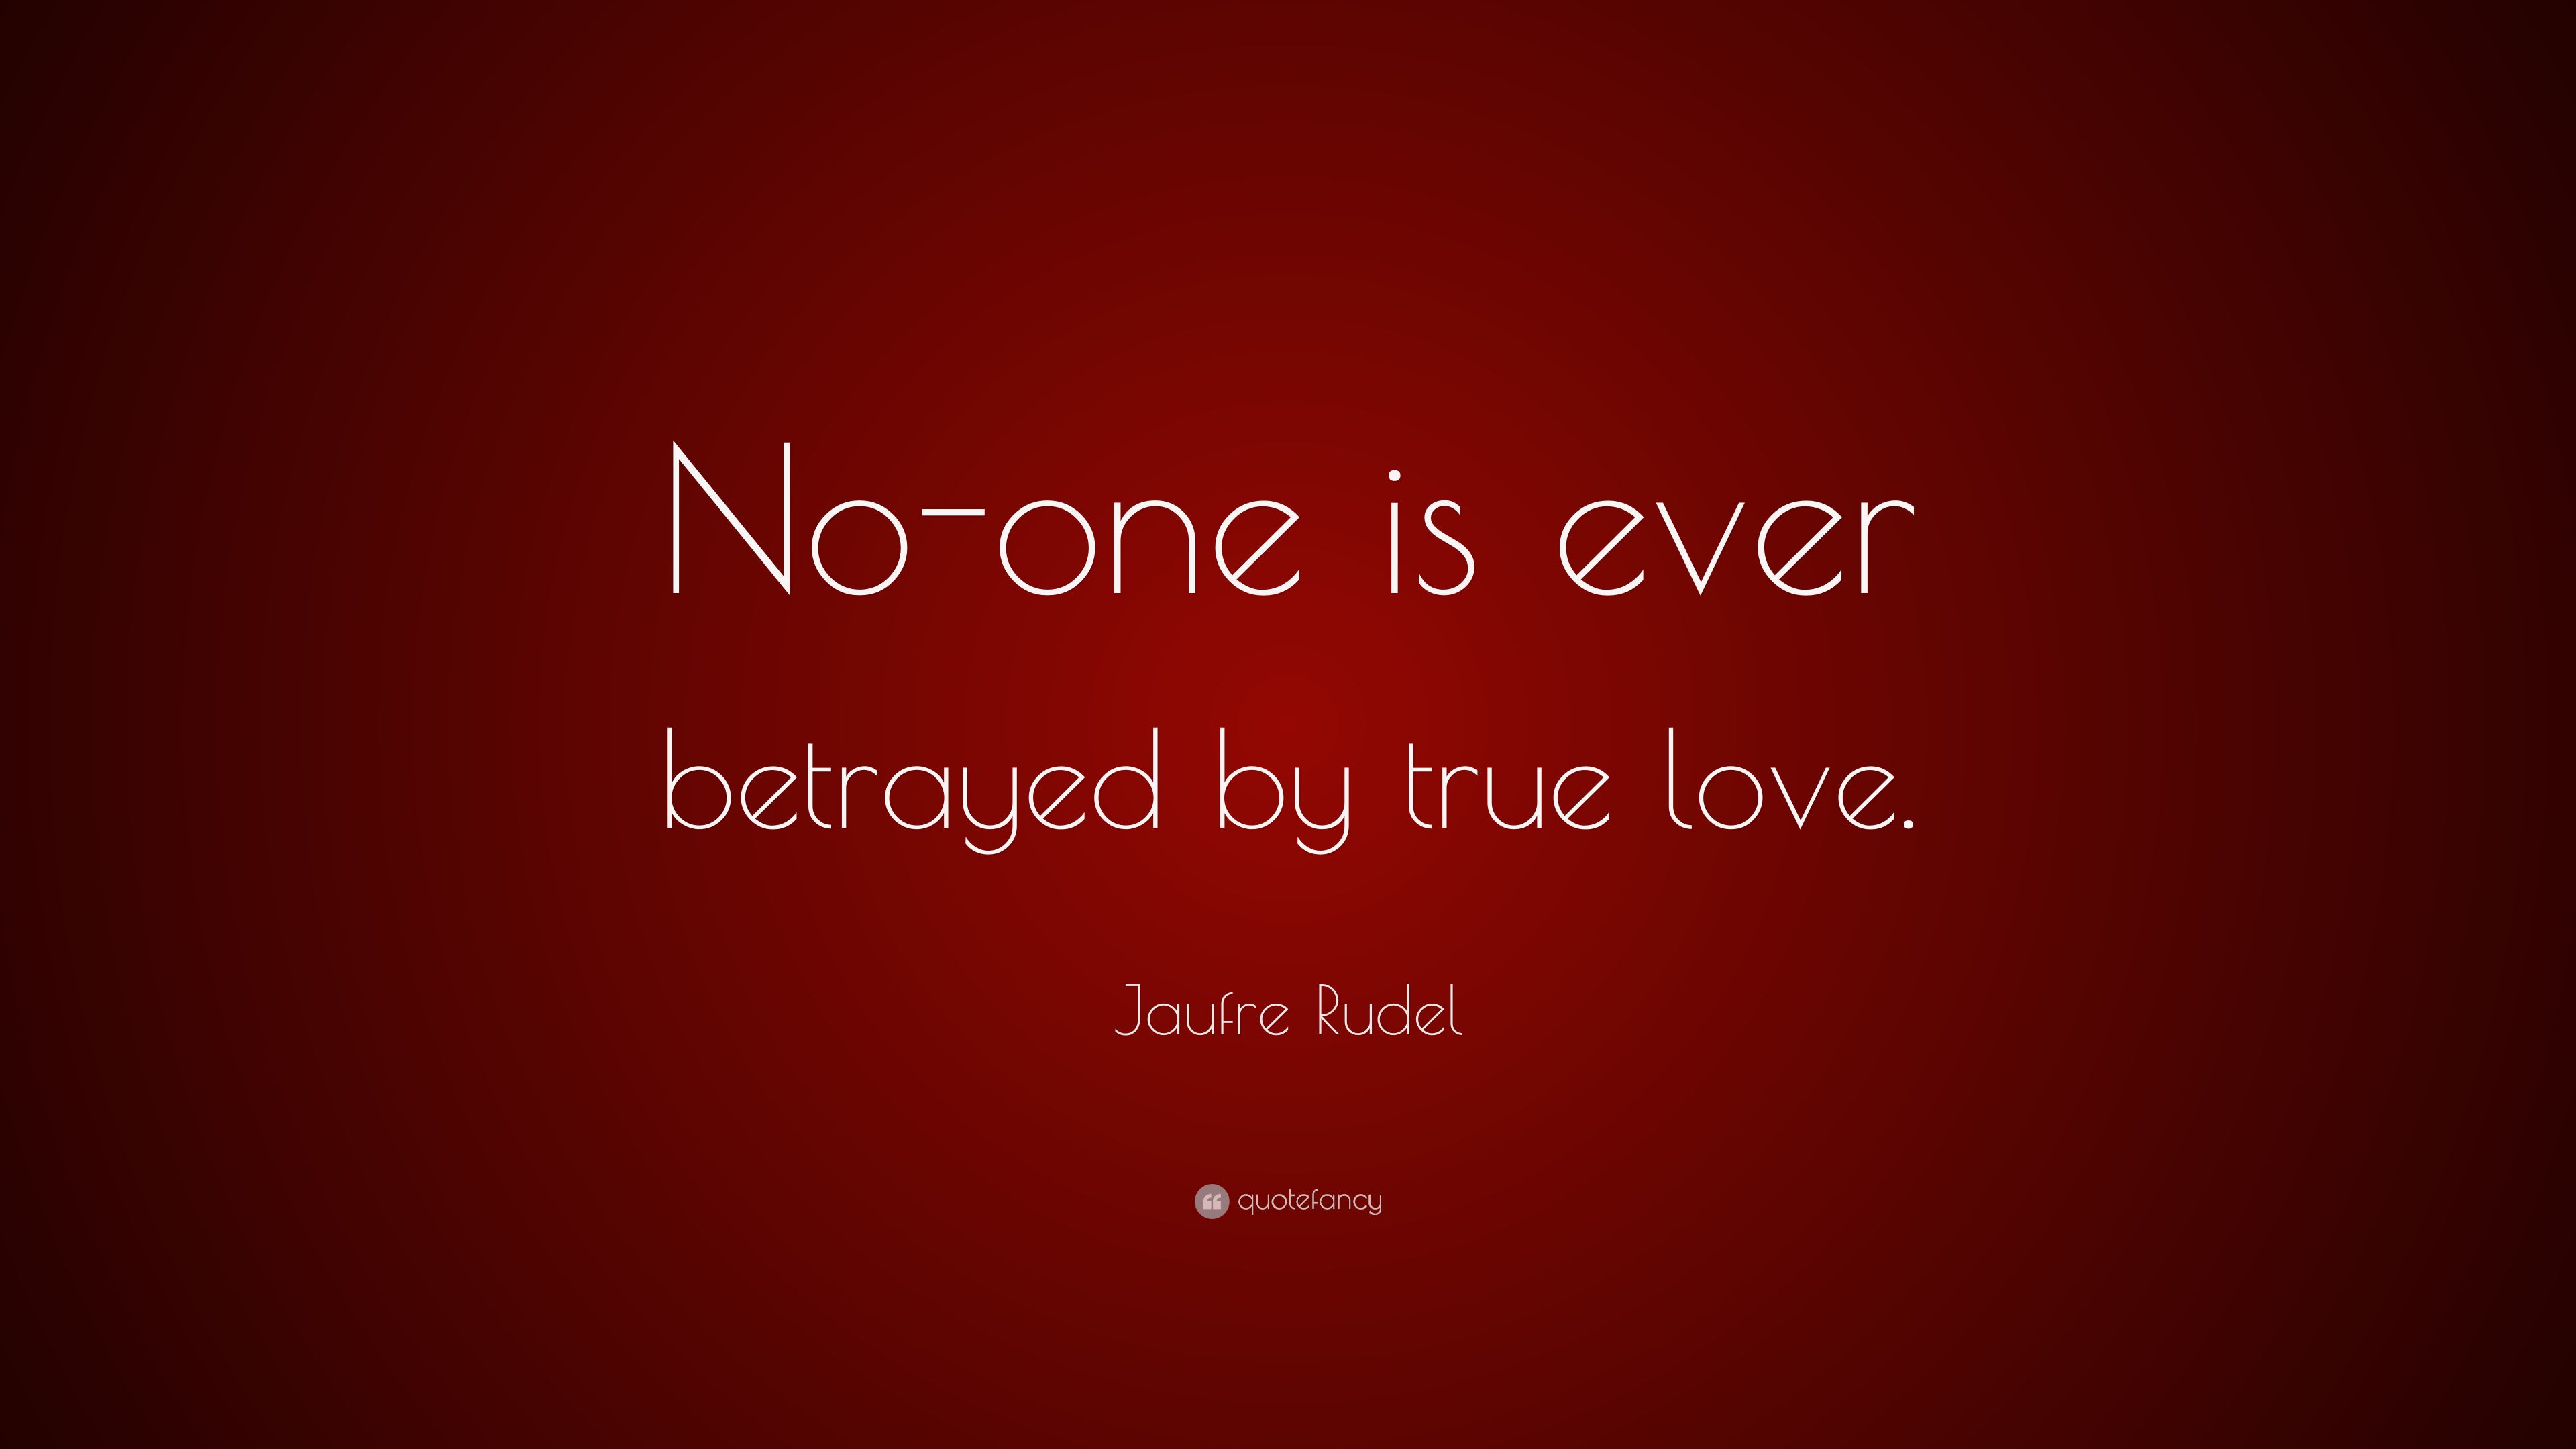 Jaufre Rudel Quote: “No One Is Ever Betrayed By True Love.” (7 Wallpaper)